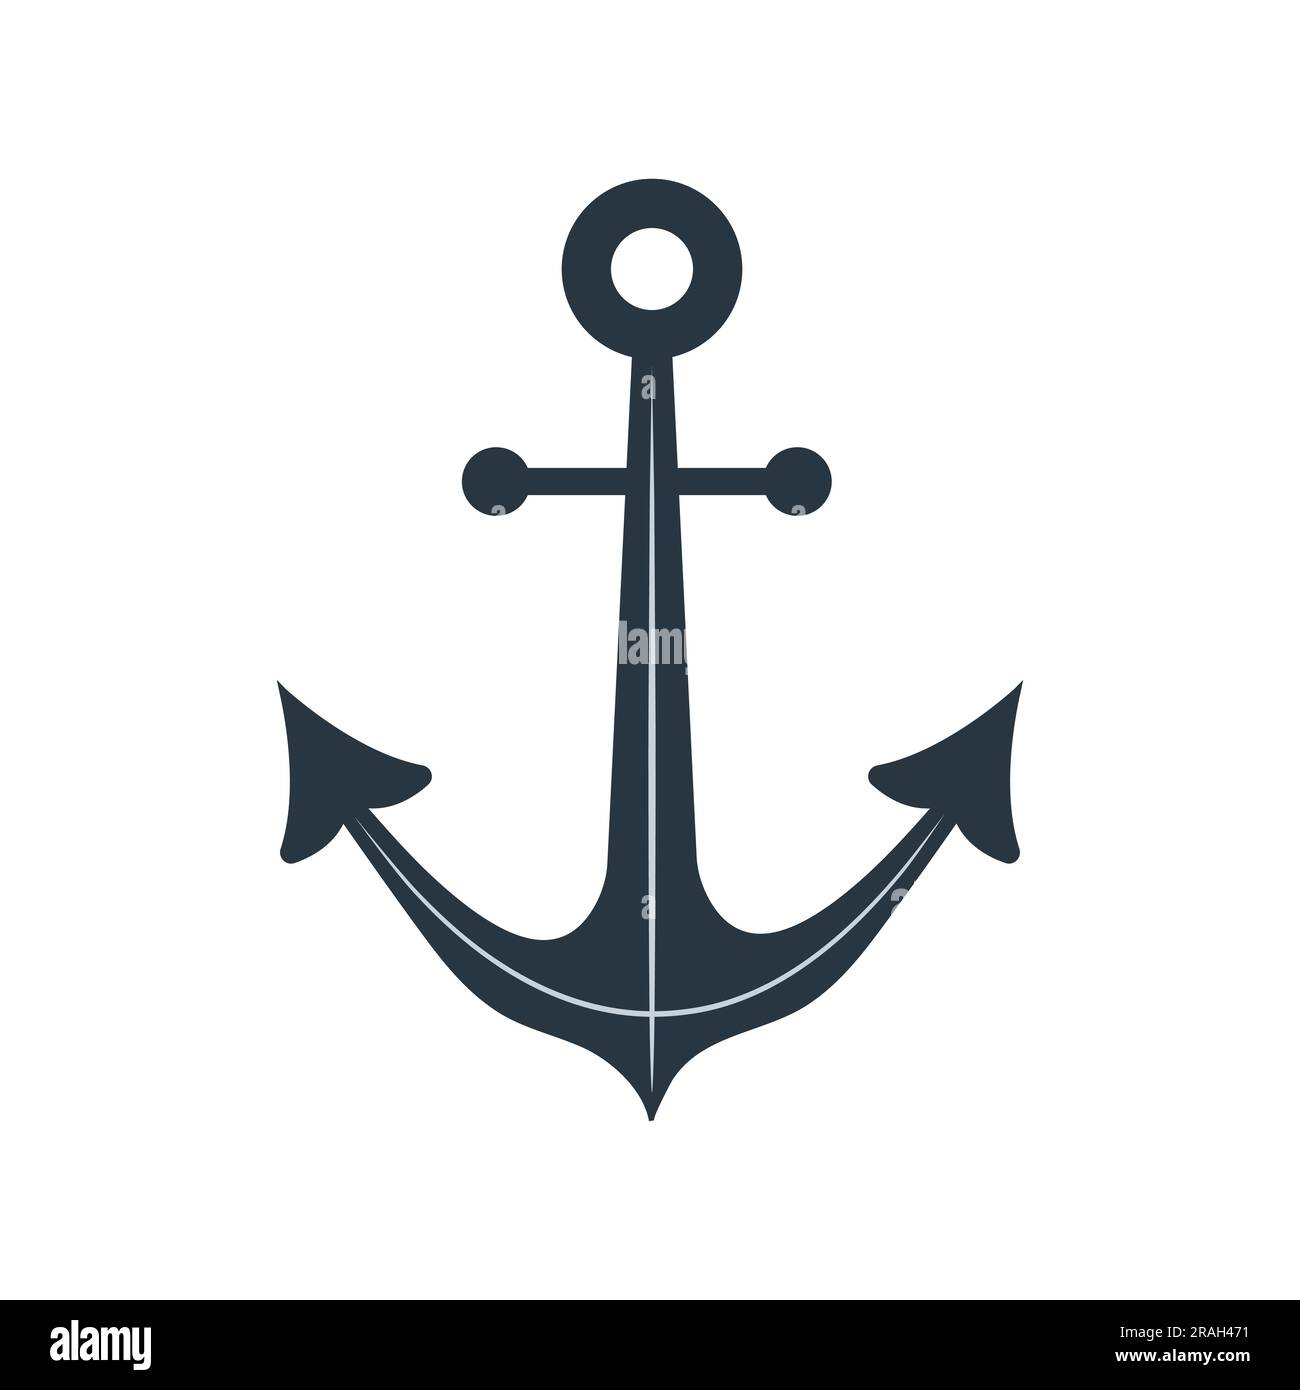 Anchor icon isolated on white background. Marine logo. Nautical symbol. Vector illustration in flat style Stock Vector